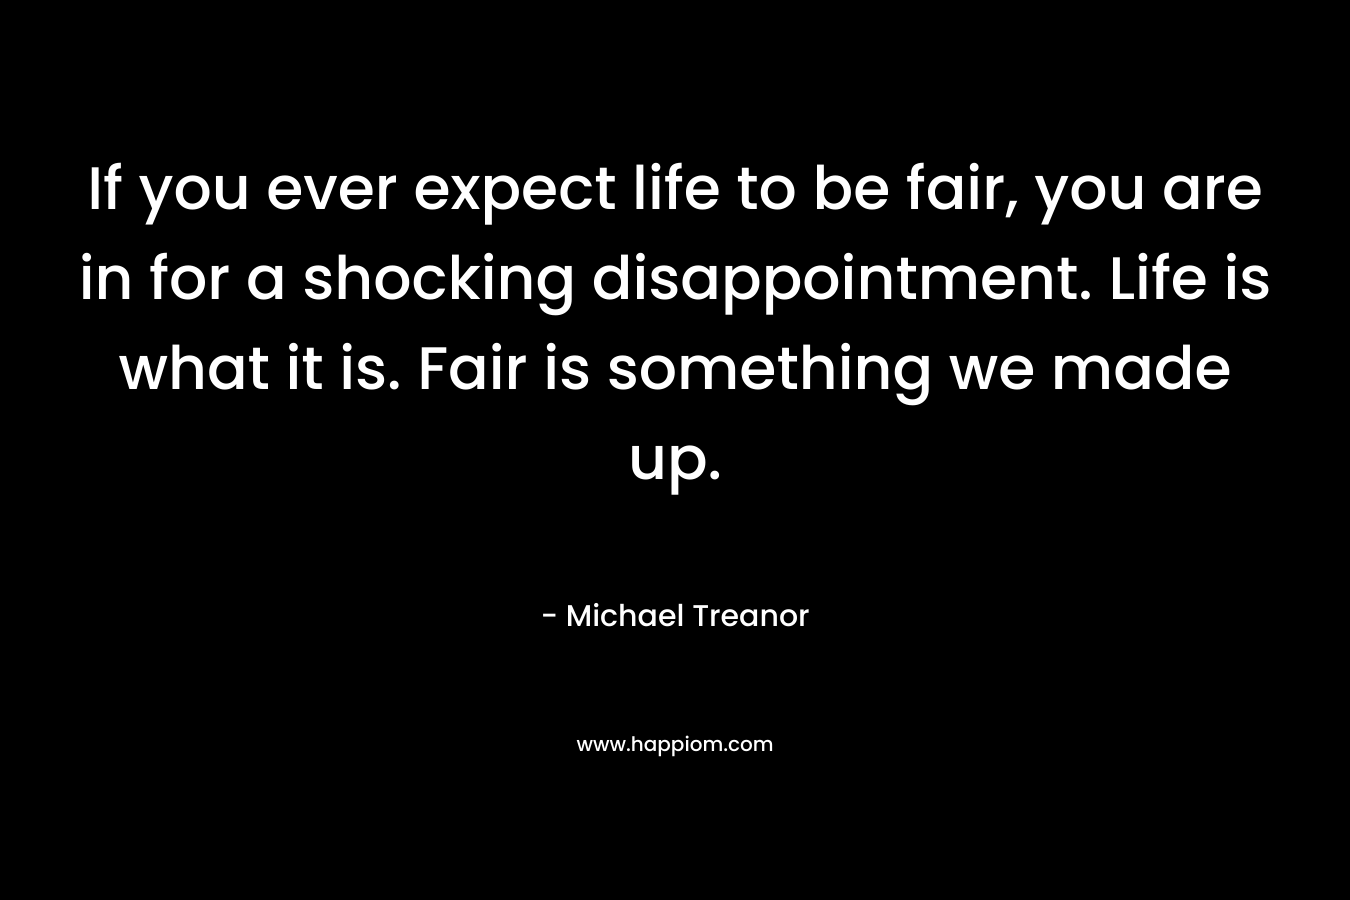 If you ever expect life to be fair, you are in for a shocking disappointment. Life is what it is. Fair is something we made up.